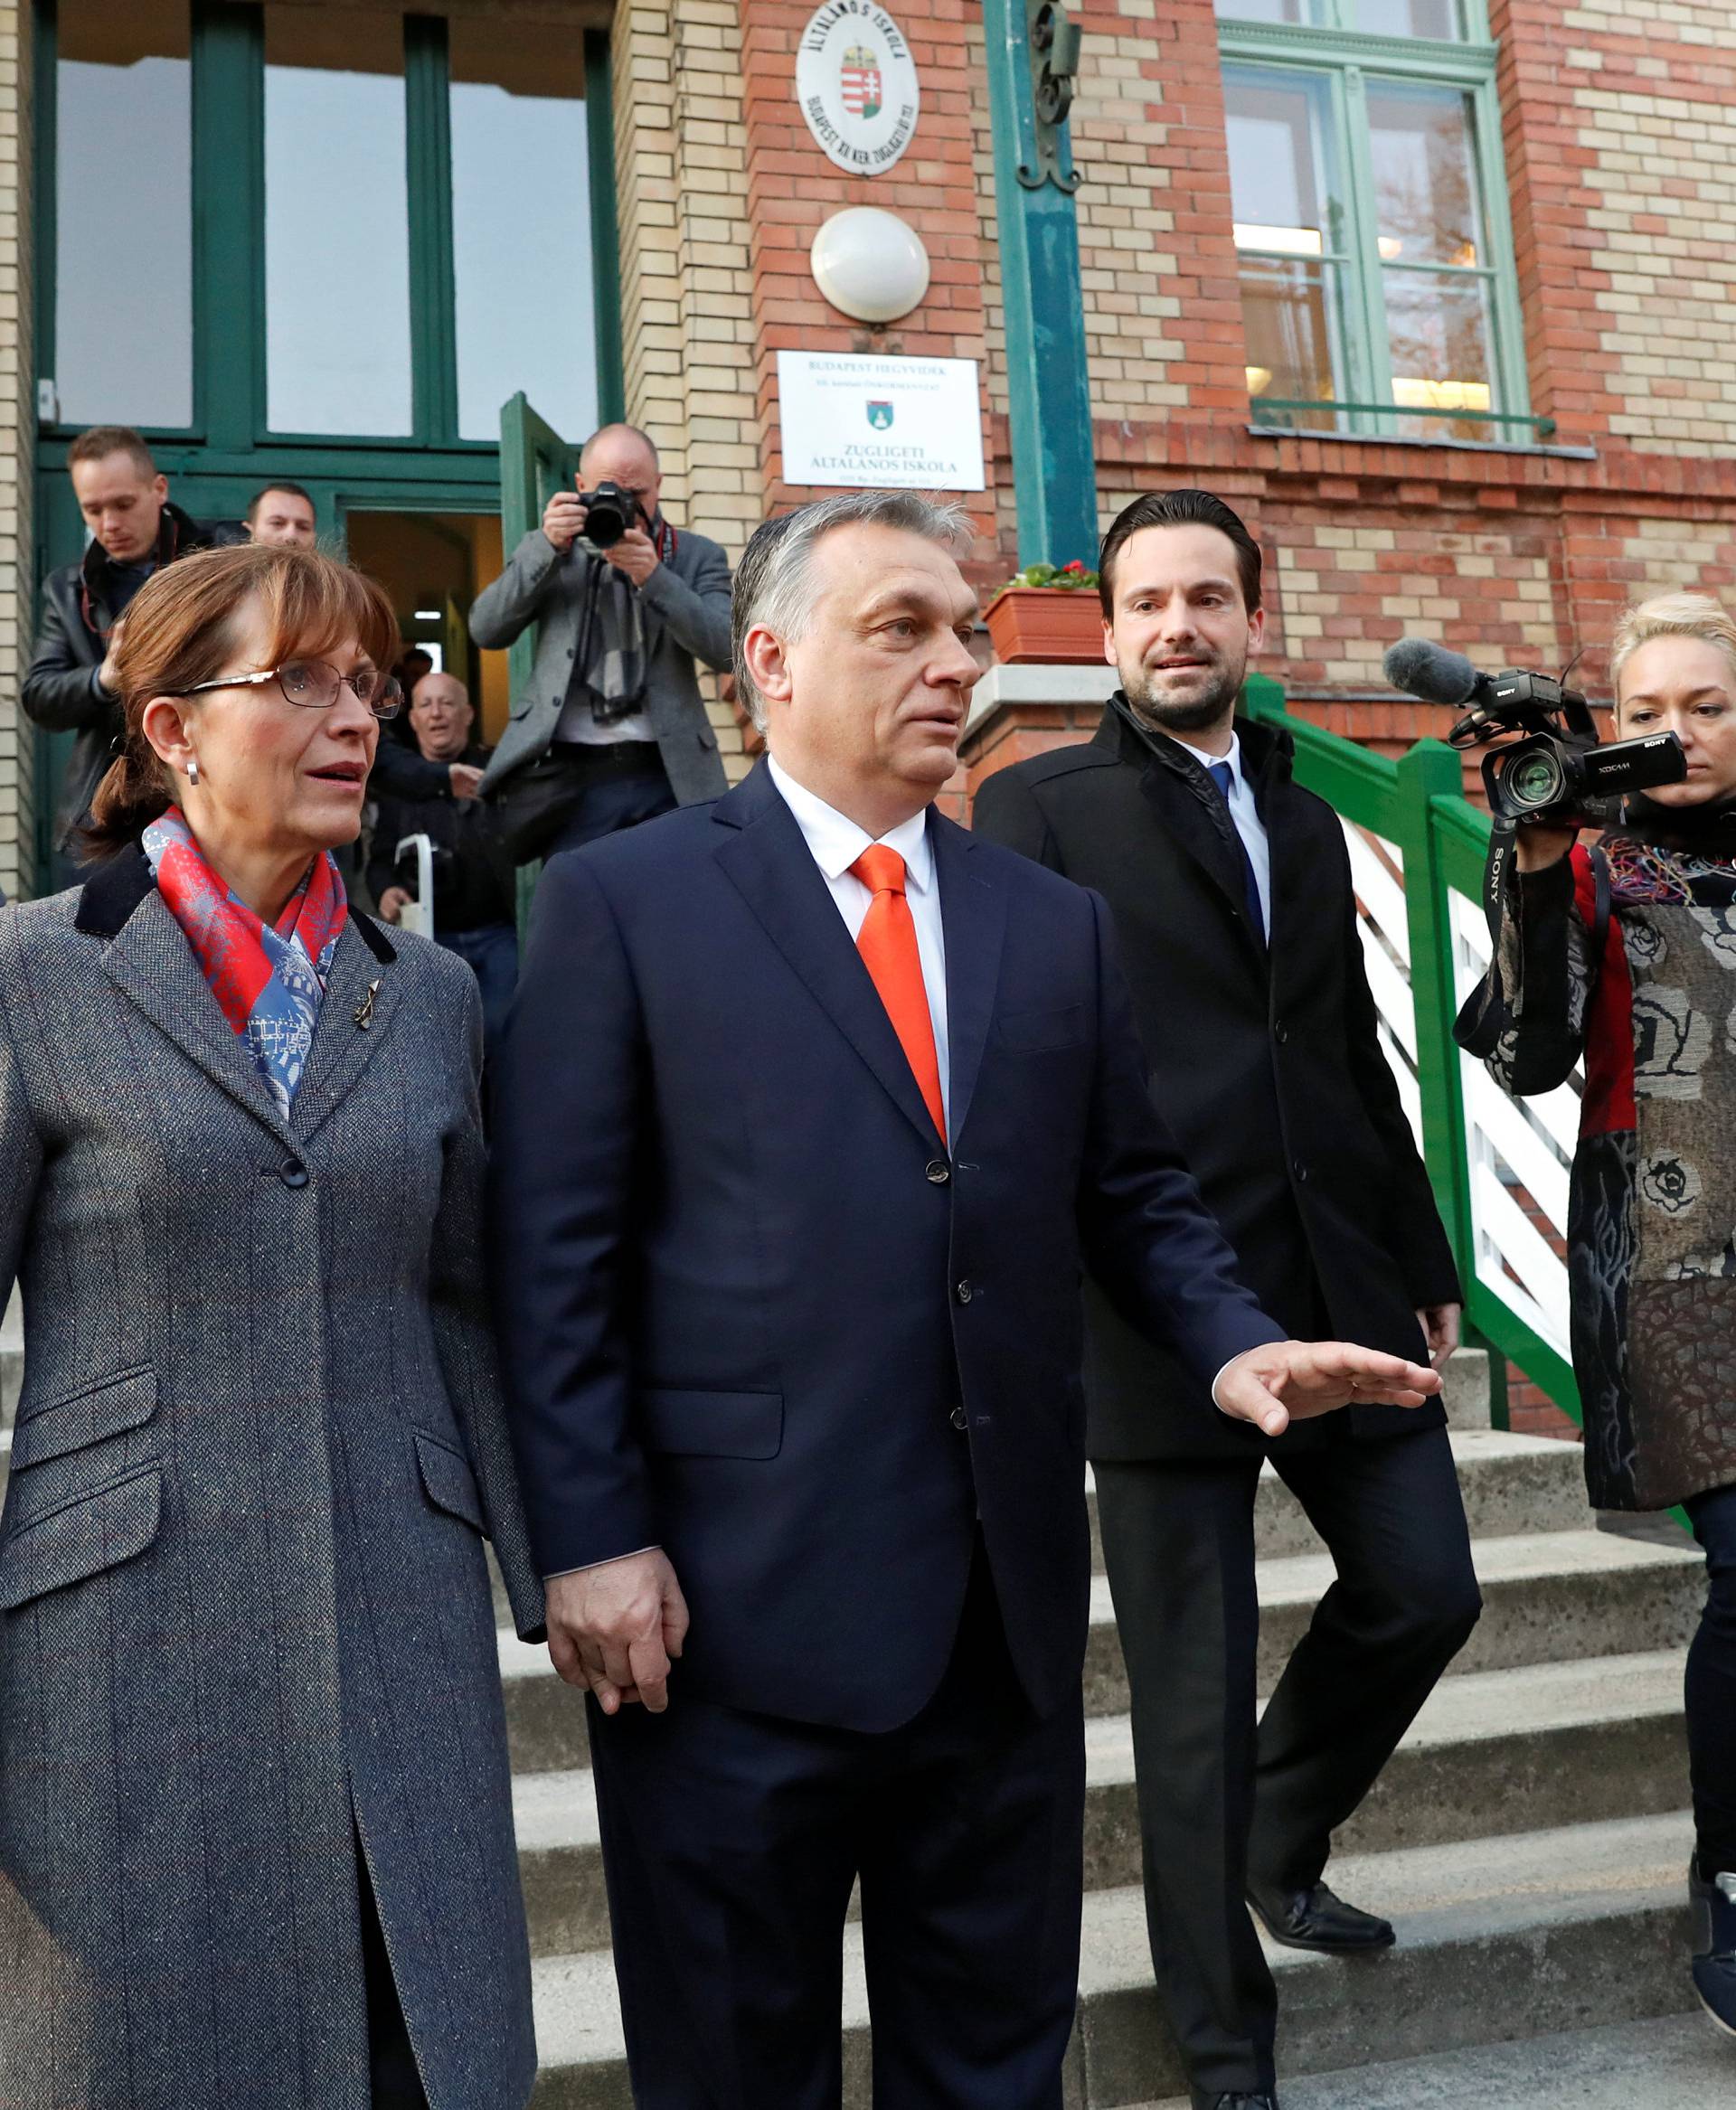 Current Hungarian Prime Minister Viktor Orban and his wife Aniko Levai leave a polling station during Hungarian parliamentary election in Budapest